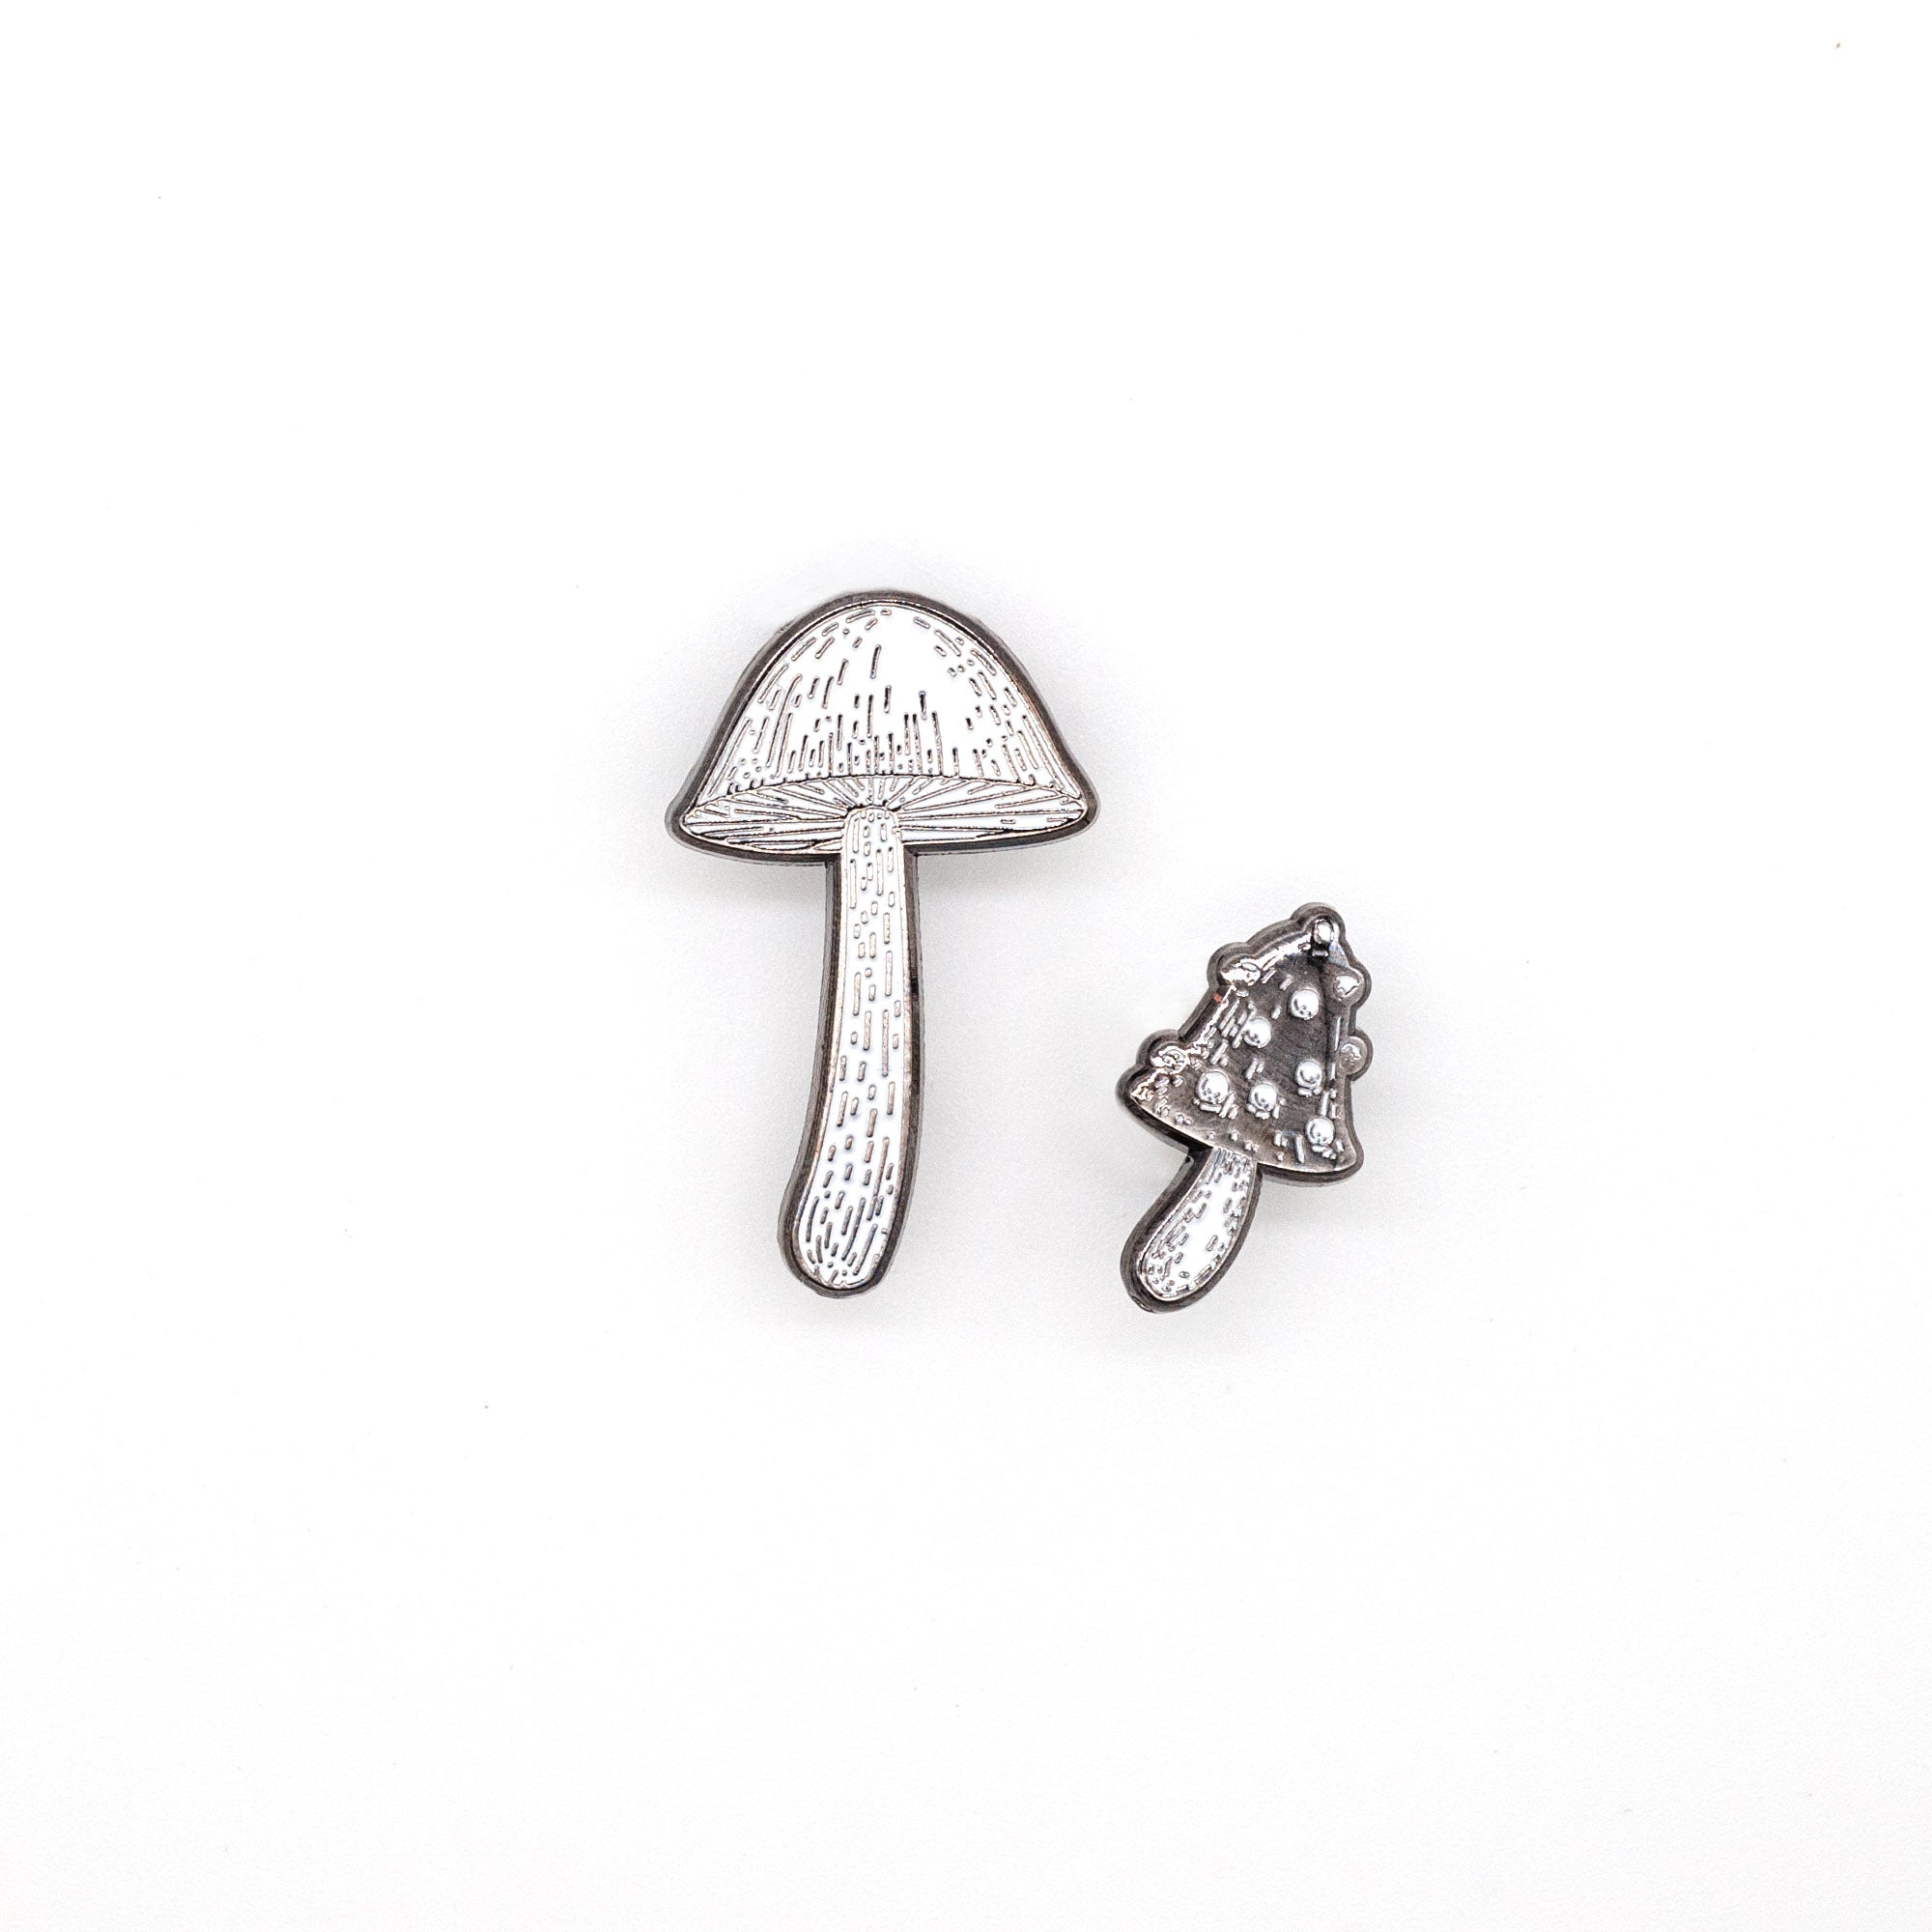 FOXLARK Witchy Pin Set - Set of 3 Witchy Enamel Pins- Mushroom Pin, Potion Bottle Pin, Witch Pin , Book Pin